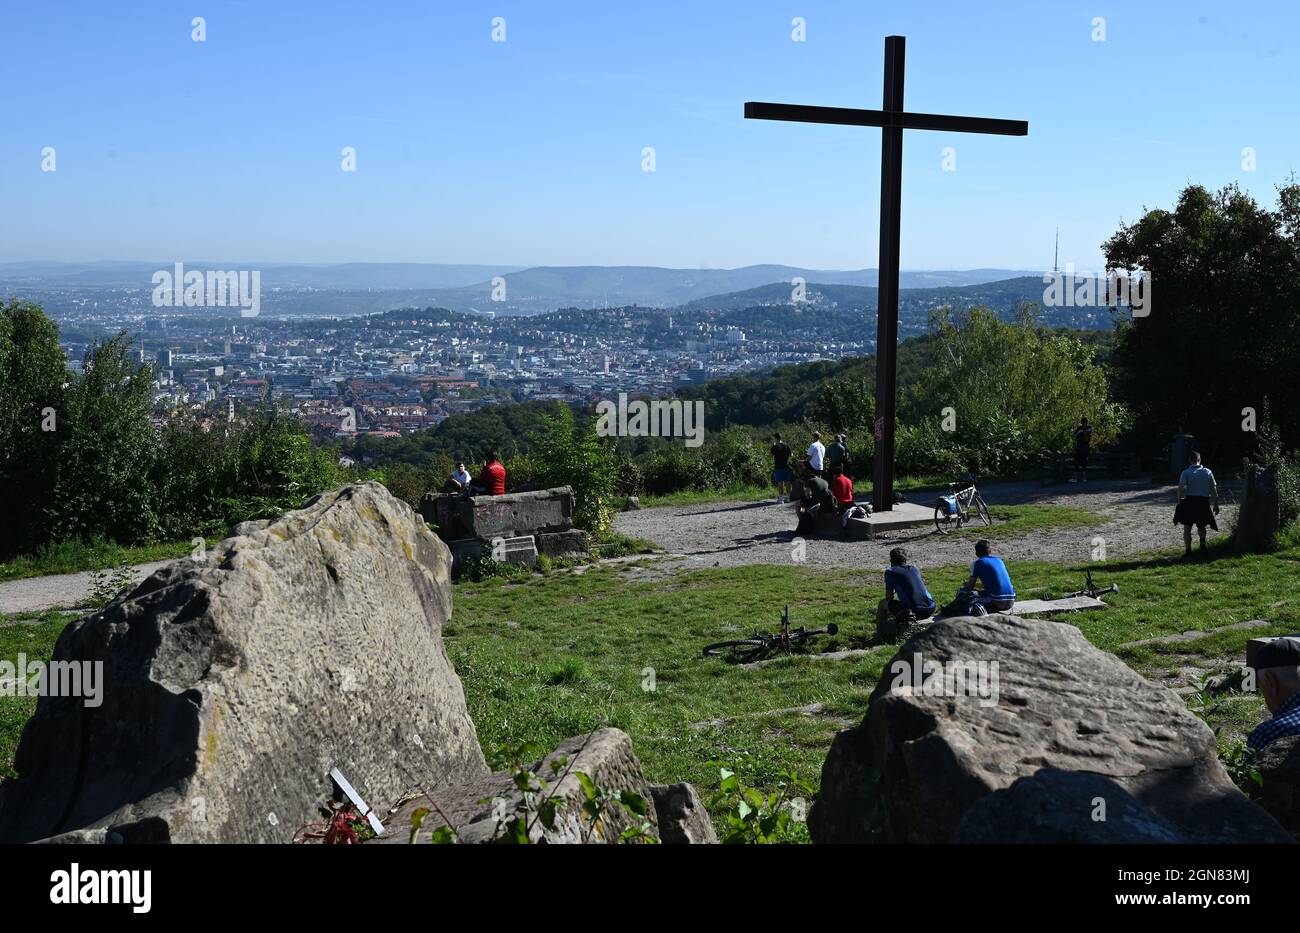 Stuttgart, Germany. 23rd Sep, 2021. People sit in bright sunshine at the Birkenkopf vantage point above the city of Stuttgart. The mountain was filled up with rubble after the Second World War and is therefore also called Monte Scherbelino. Credit: Bernd Weißbrod/dpa/Alamy Live News Stock Photo